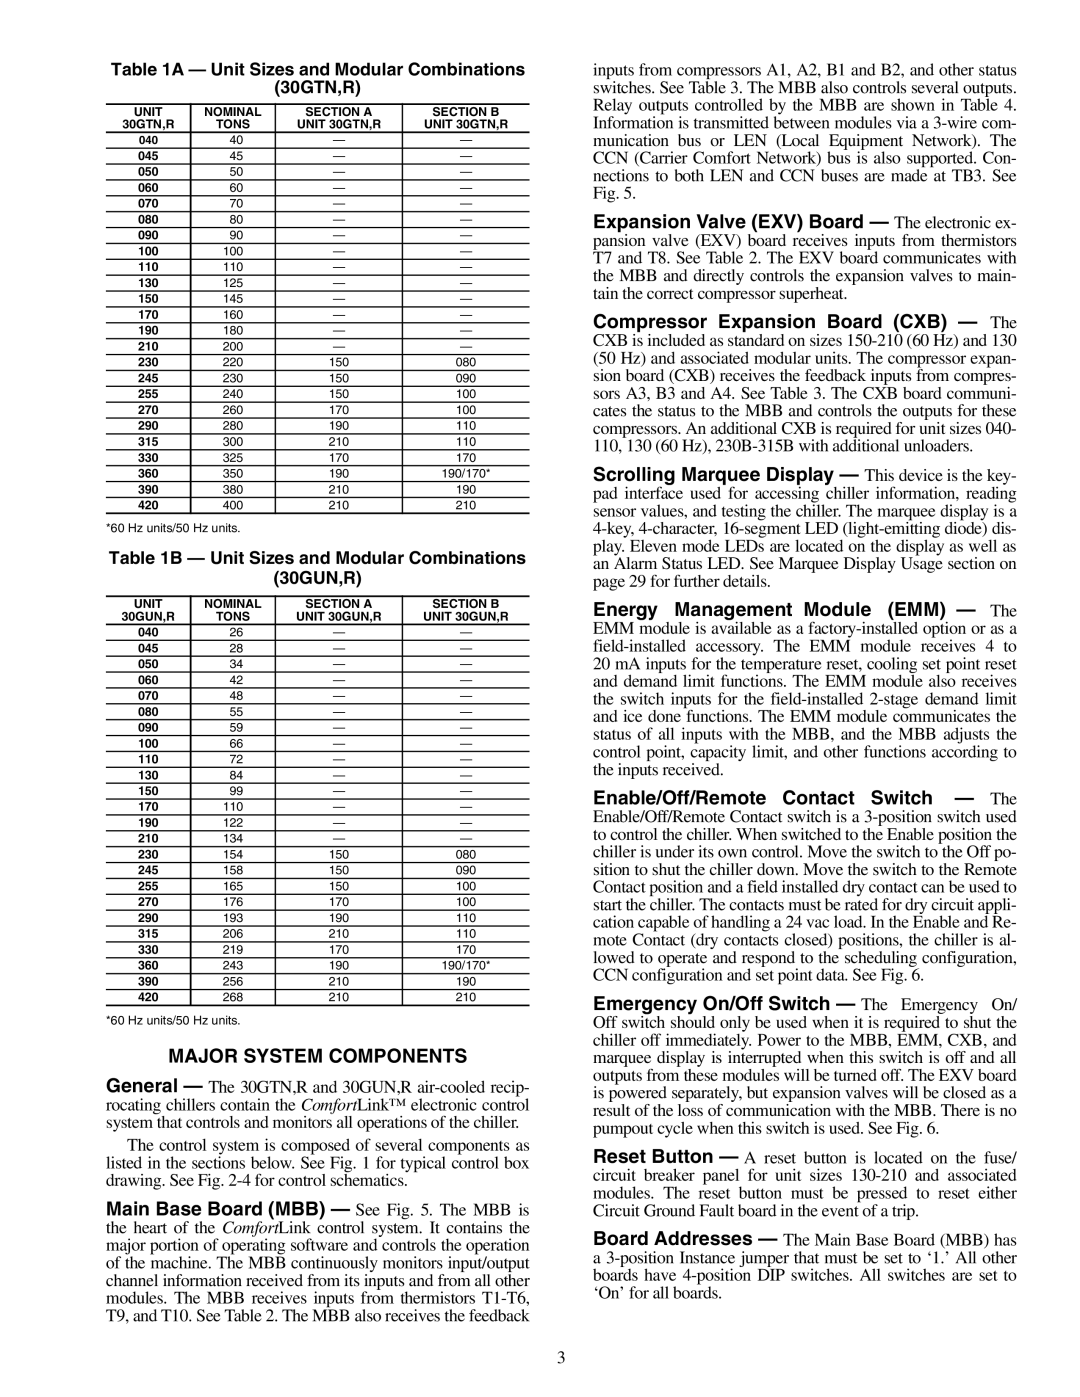 Carrier Air Conditioner specifications Major System Components 